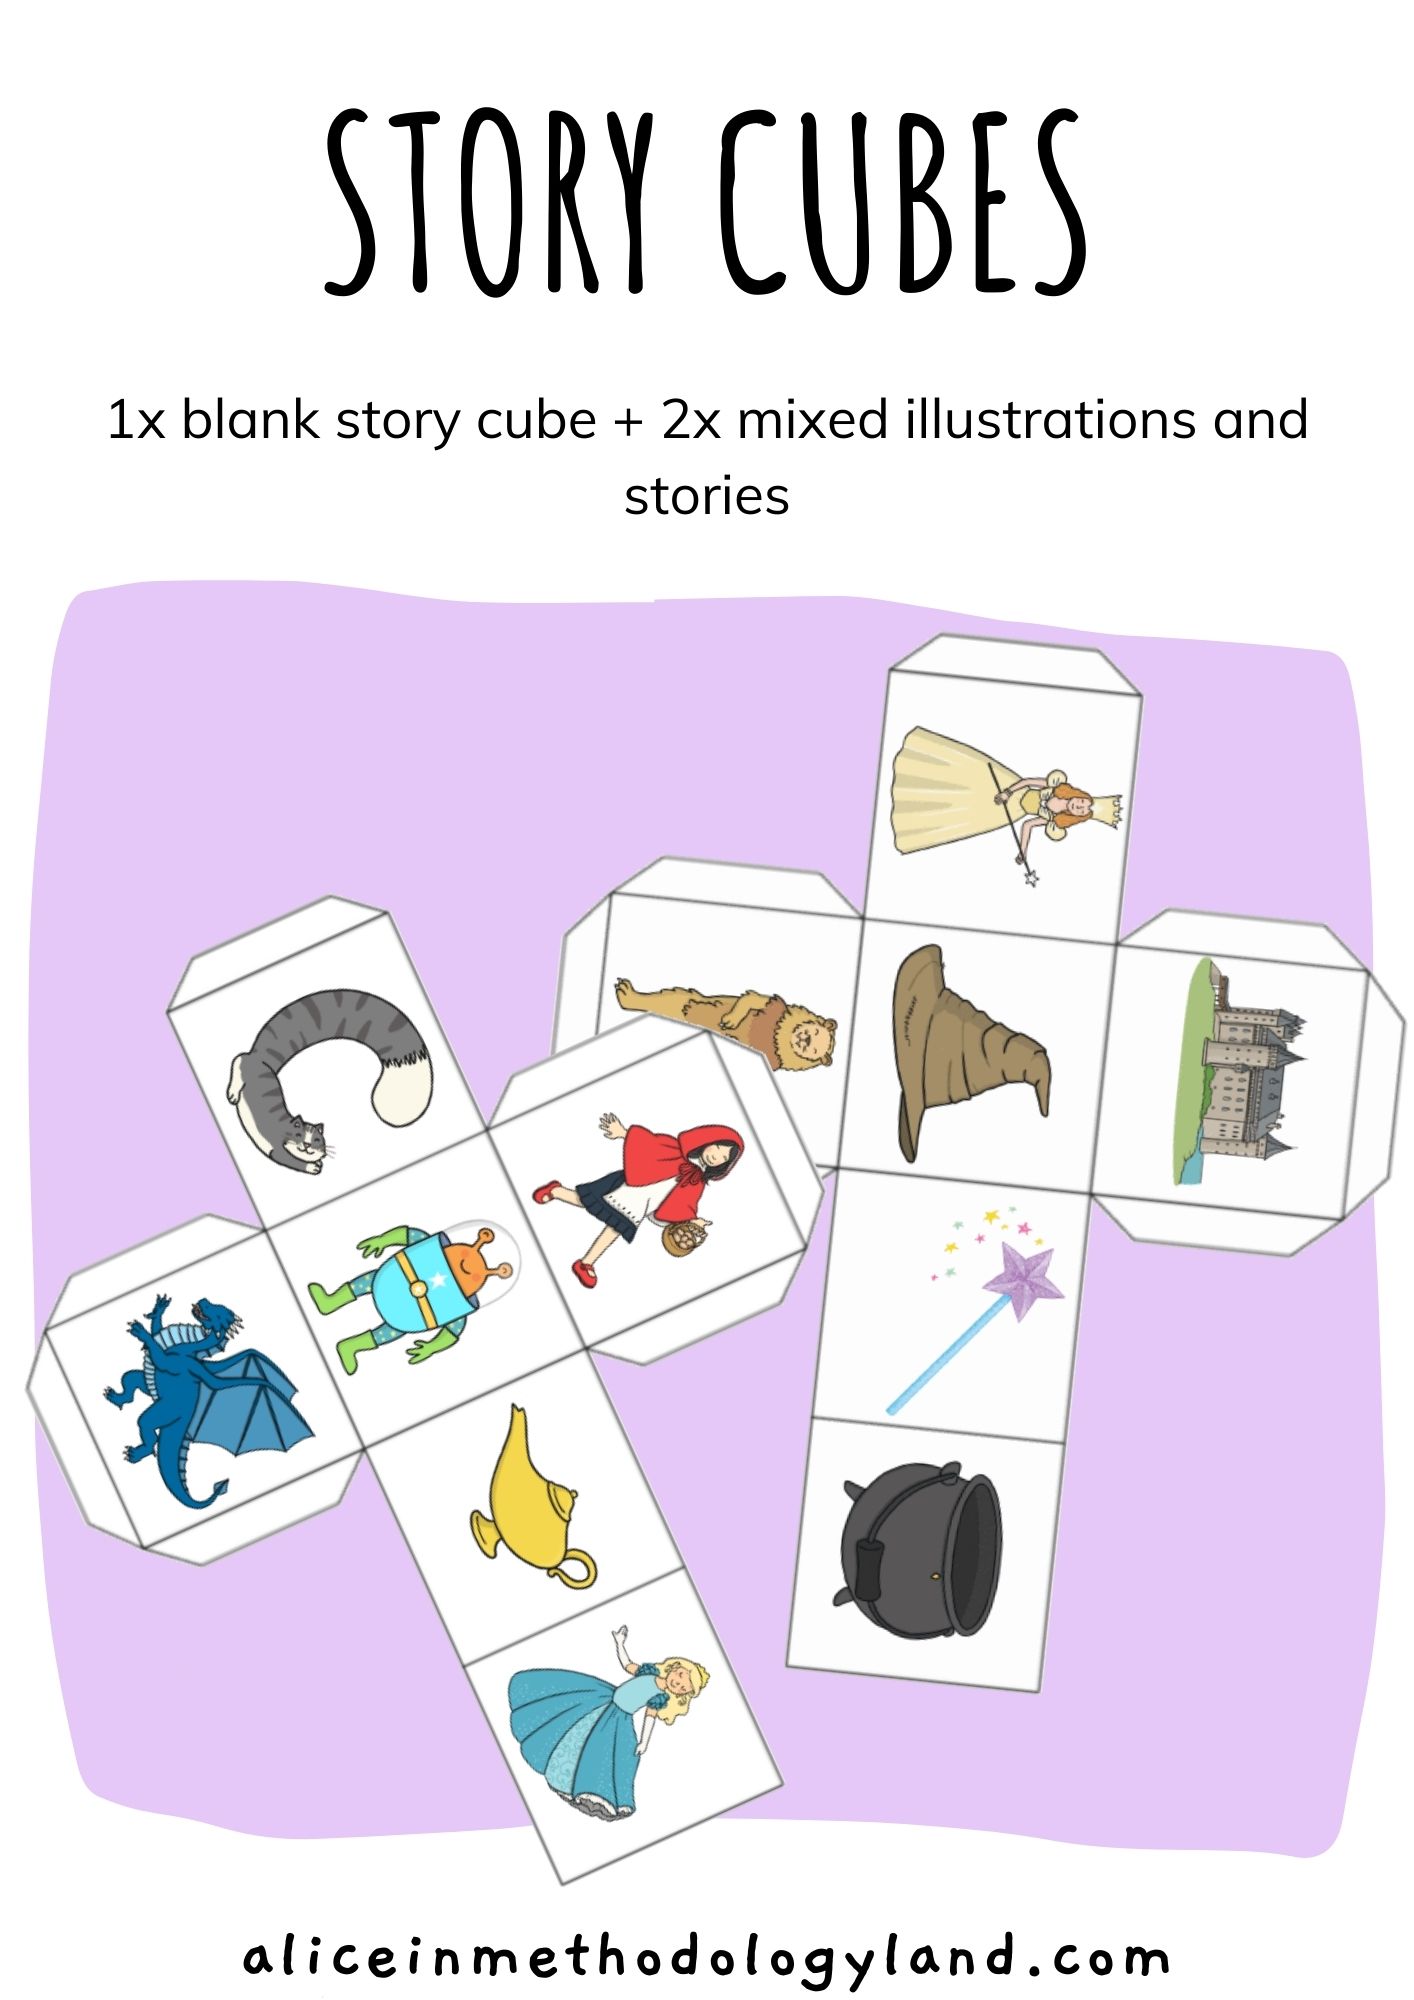 Story cubes x8: Famous Fairy Tales and Stories Edition ⋆ Discover  Methodologyland ✨